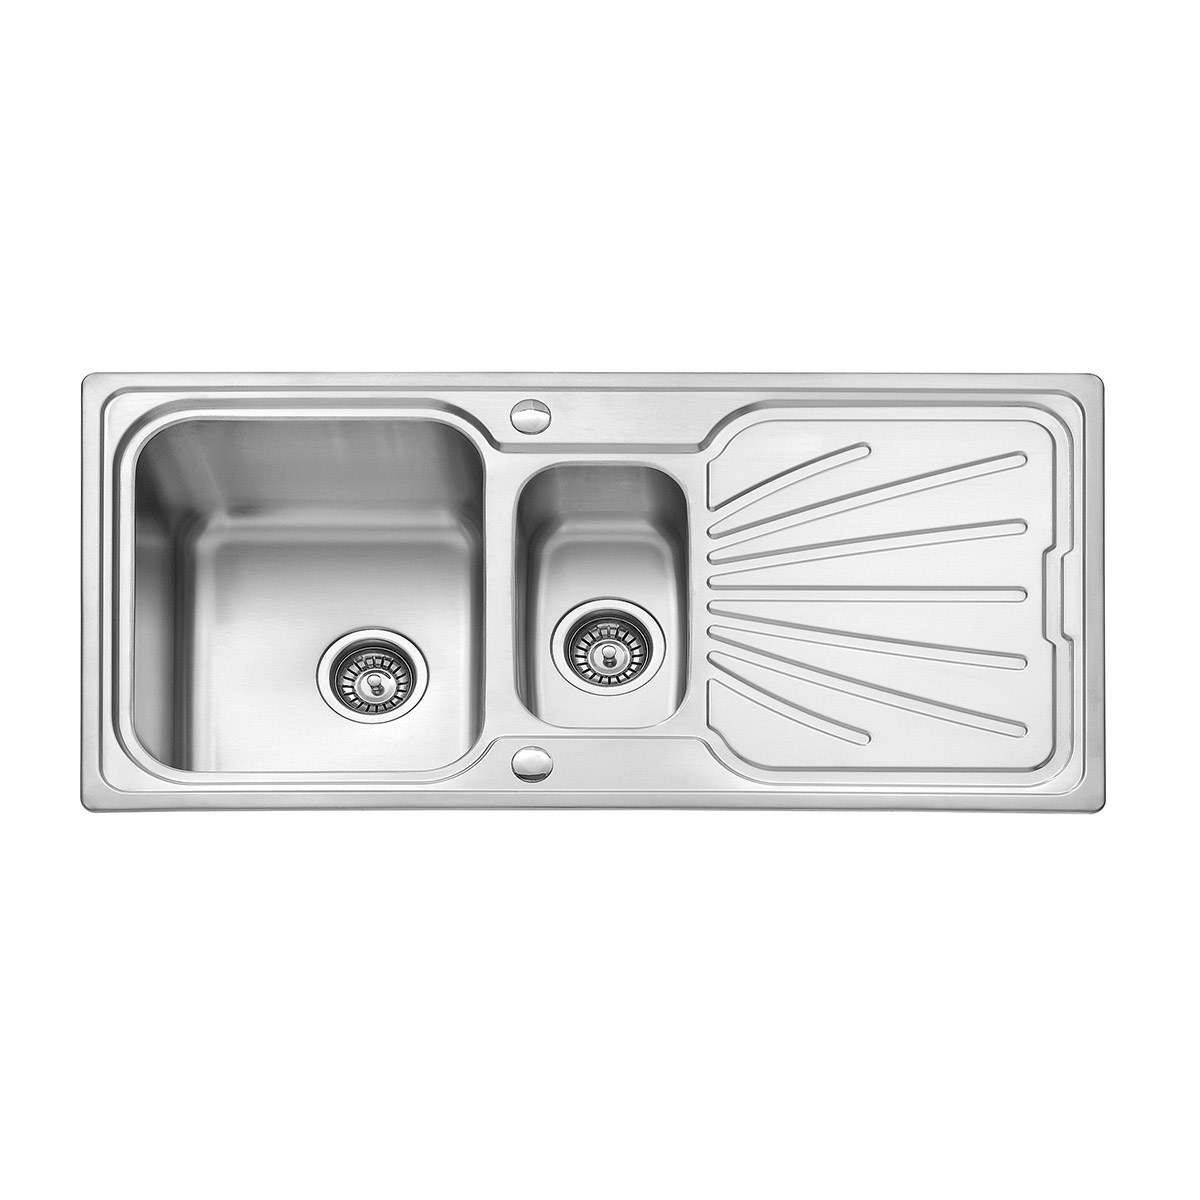 Eirline Large bowl & half sink with drainer